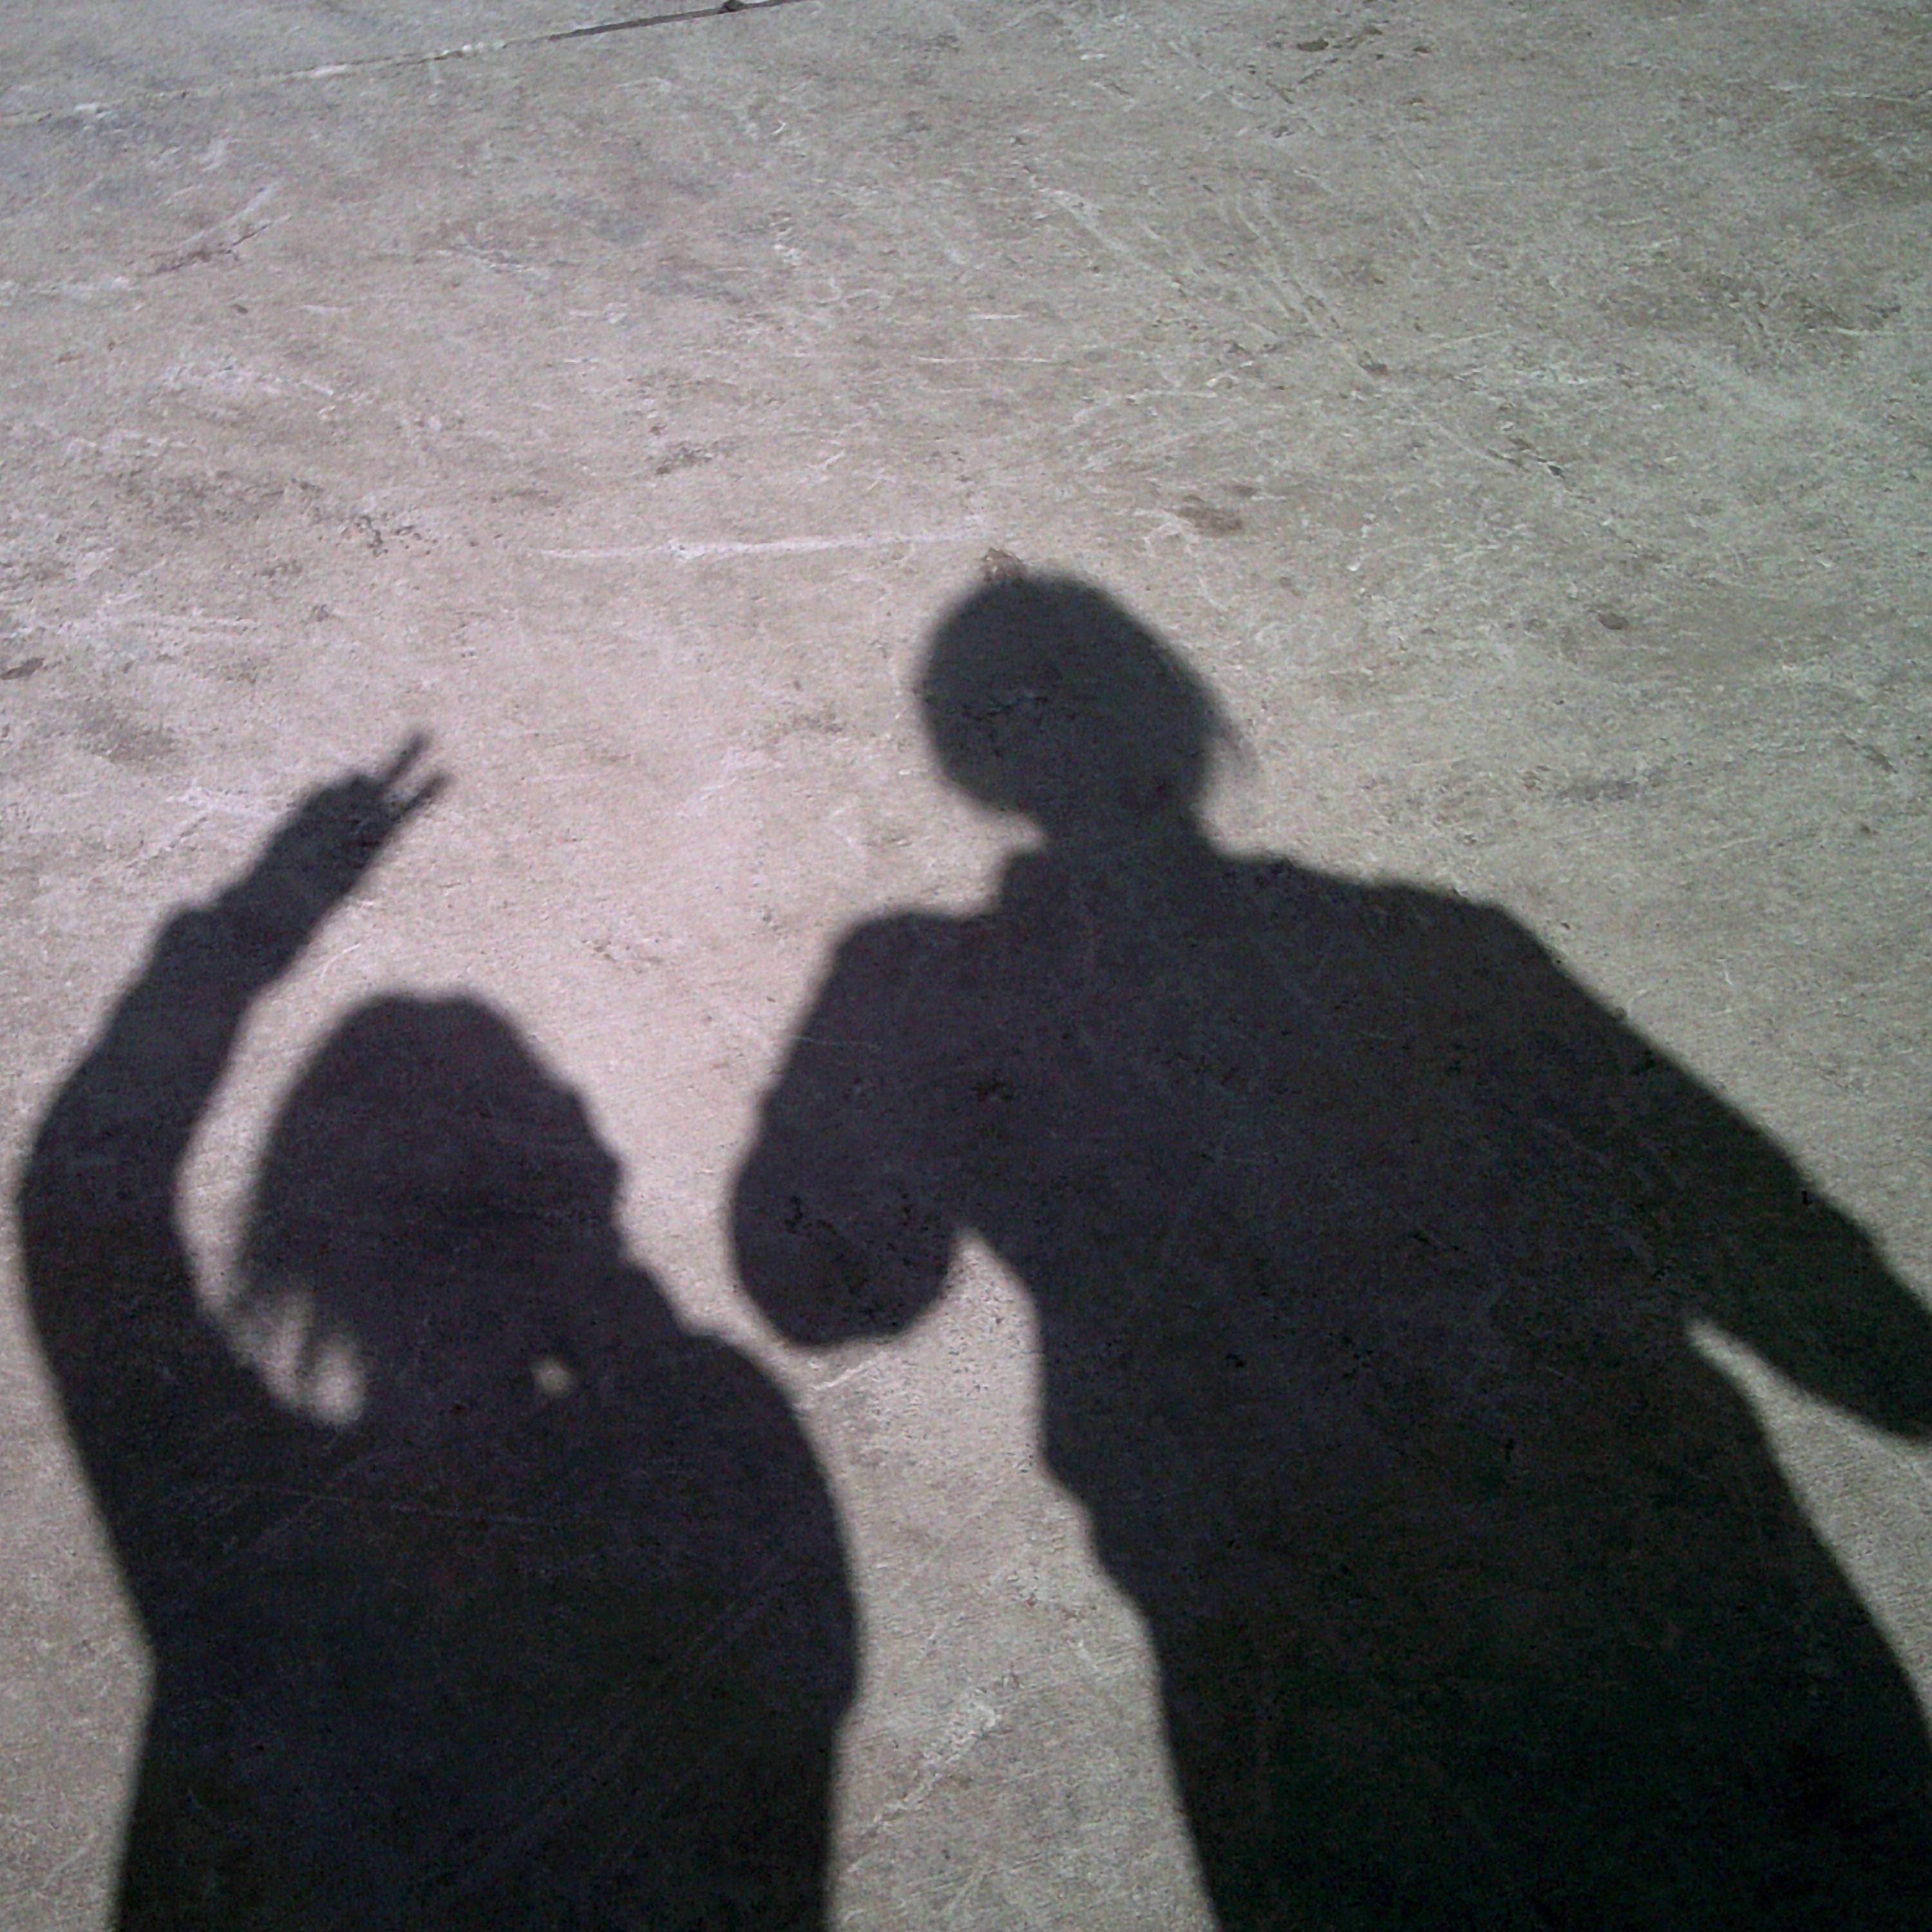 Photo shows the shadows of two people against concrete ground^empty:{ds__assetid^as_asset:asset_name}